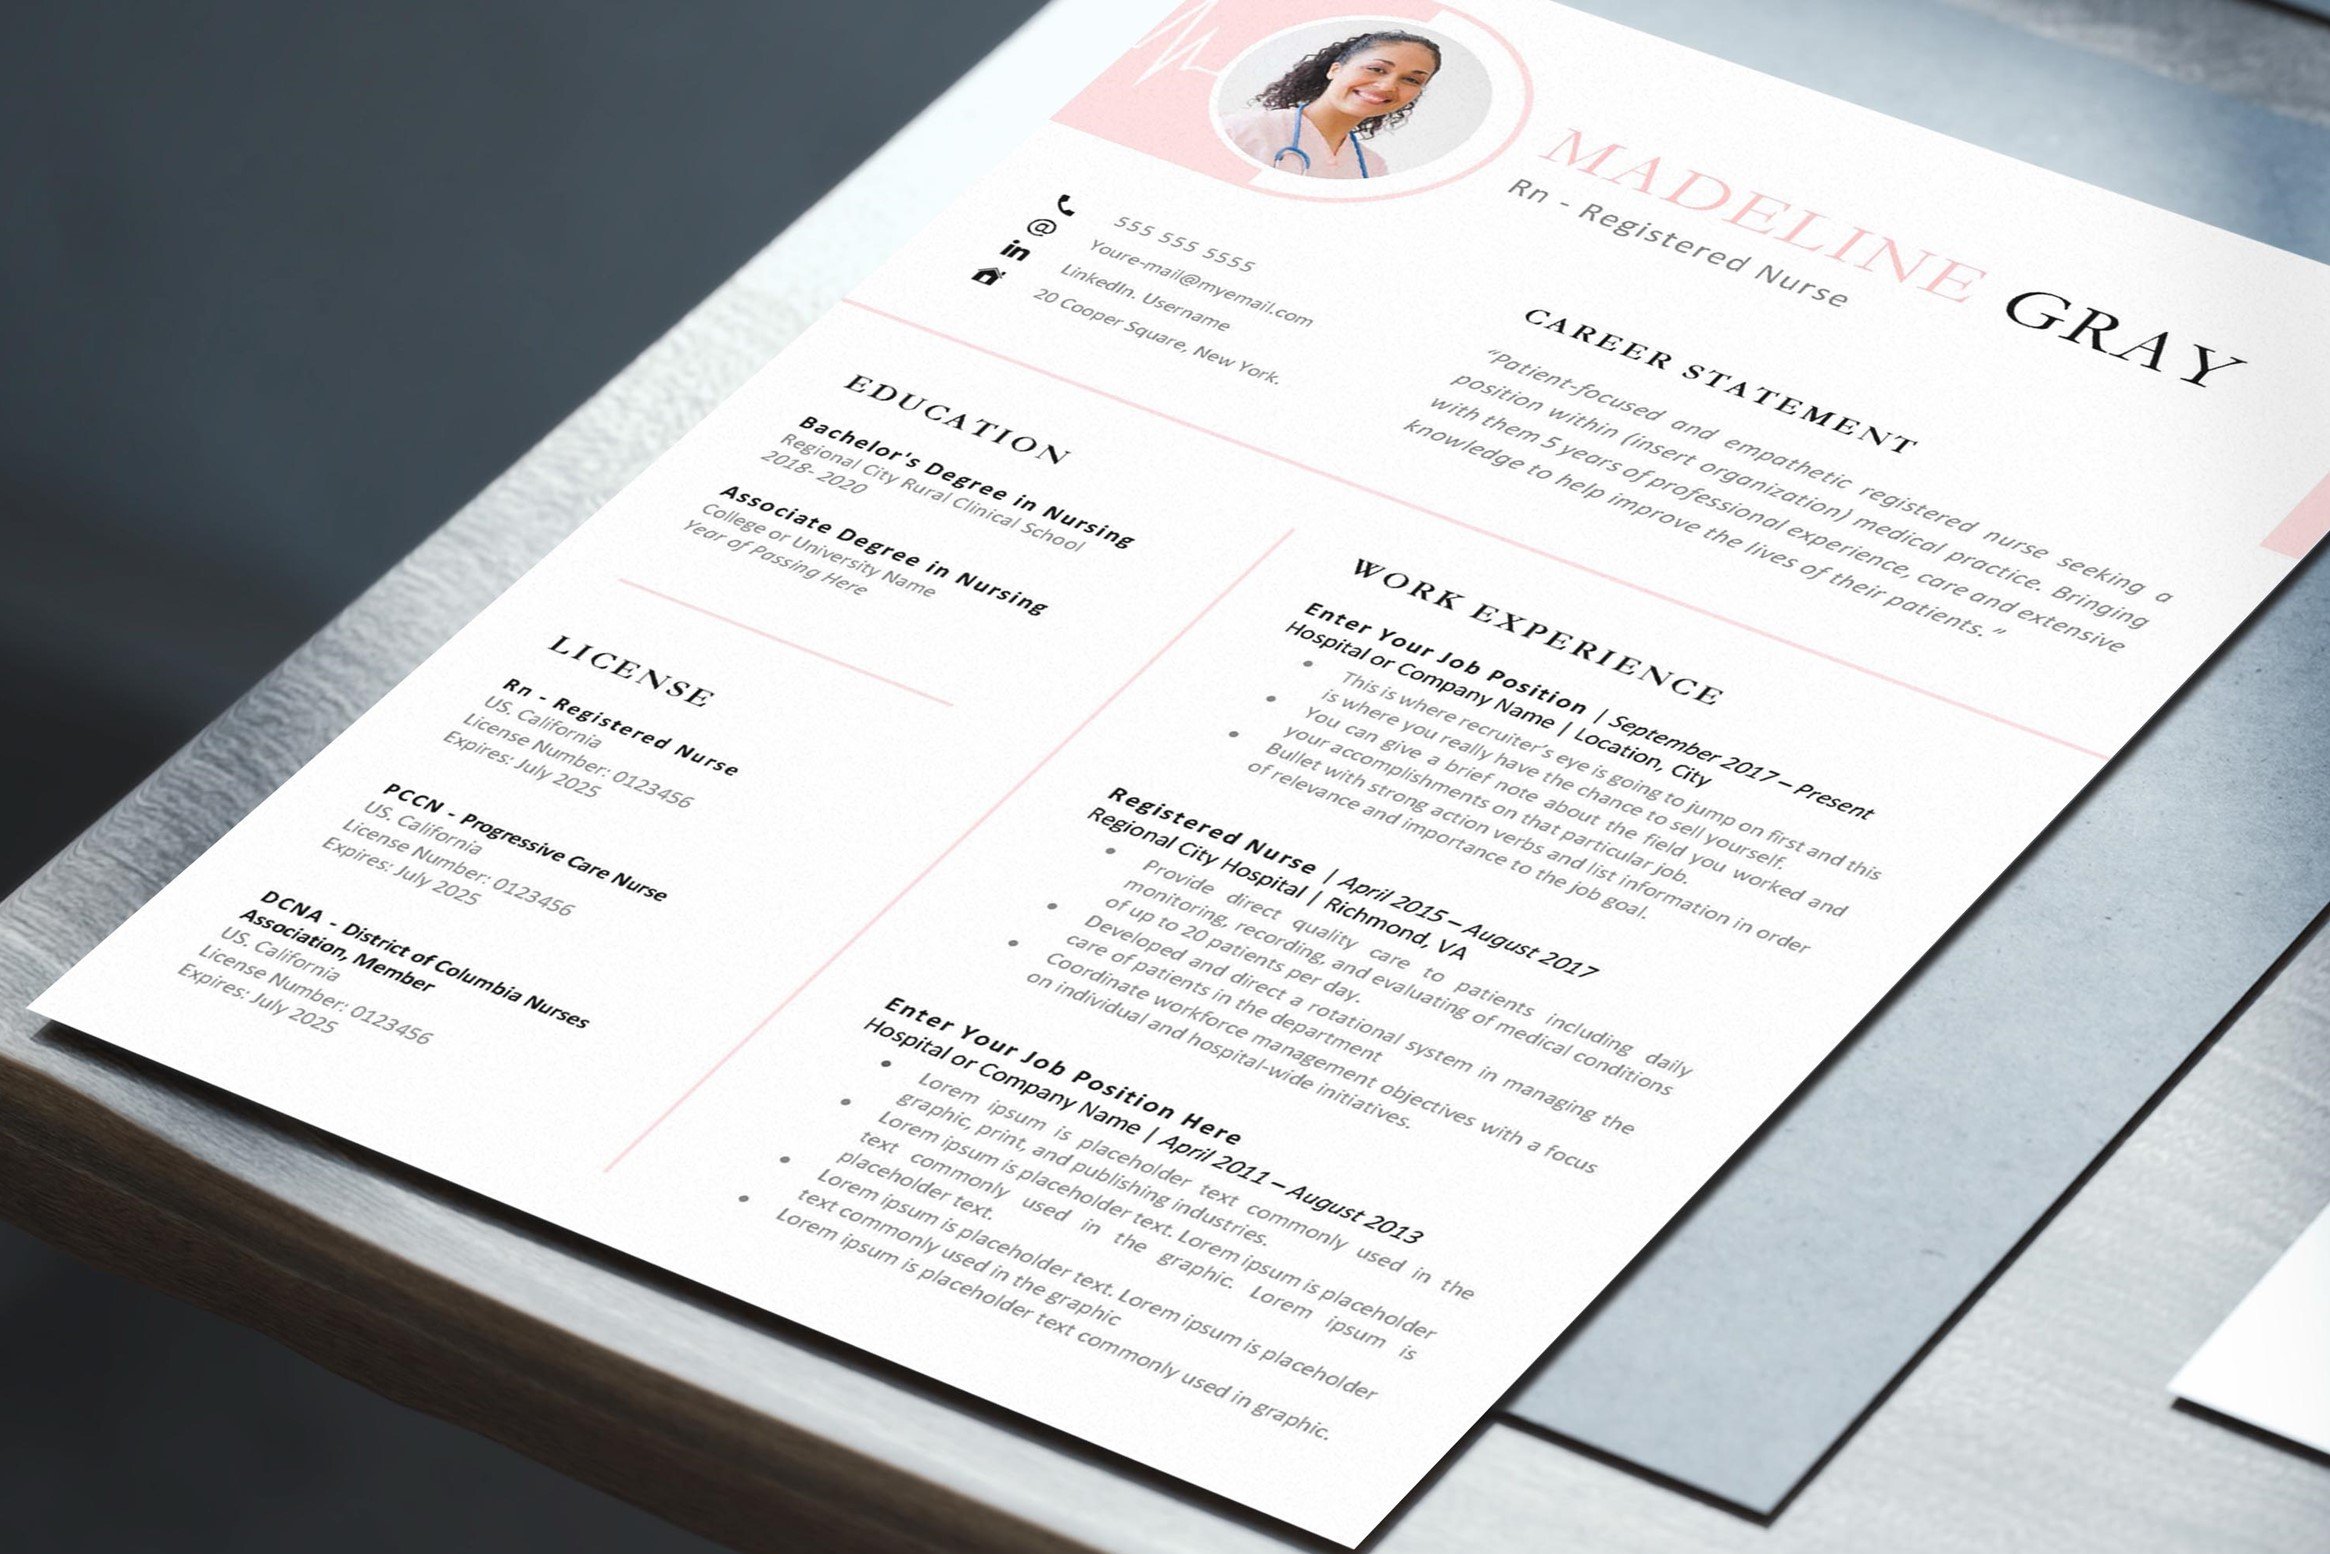 Professional resume is displayed on a table.